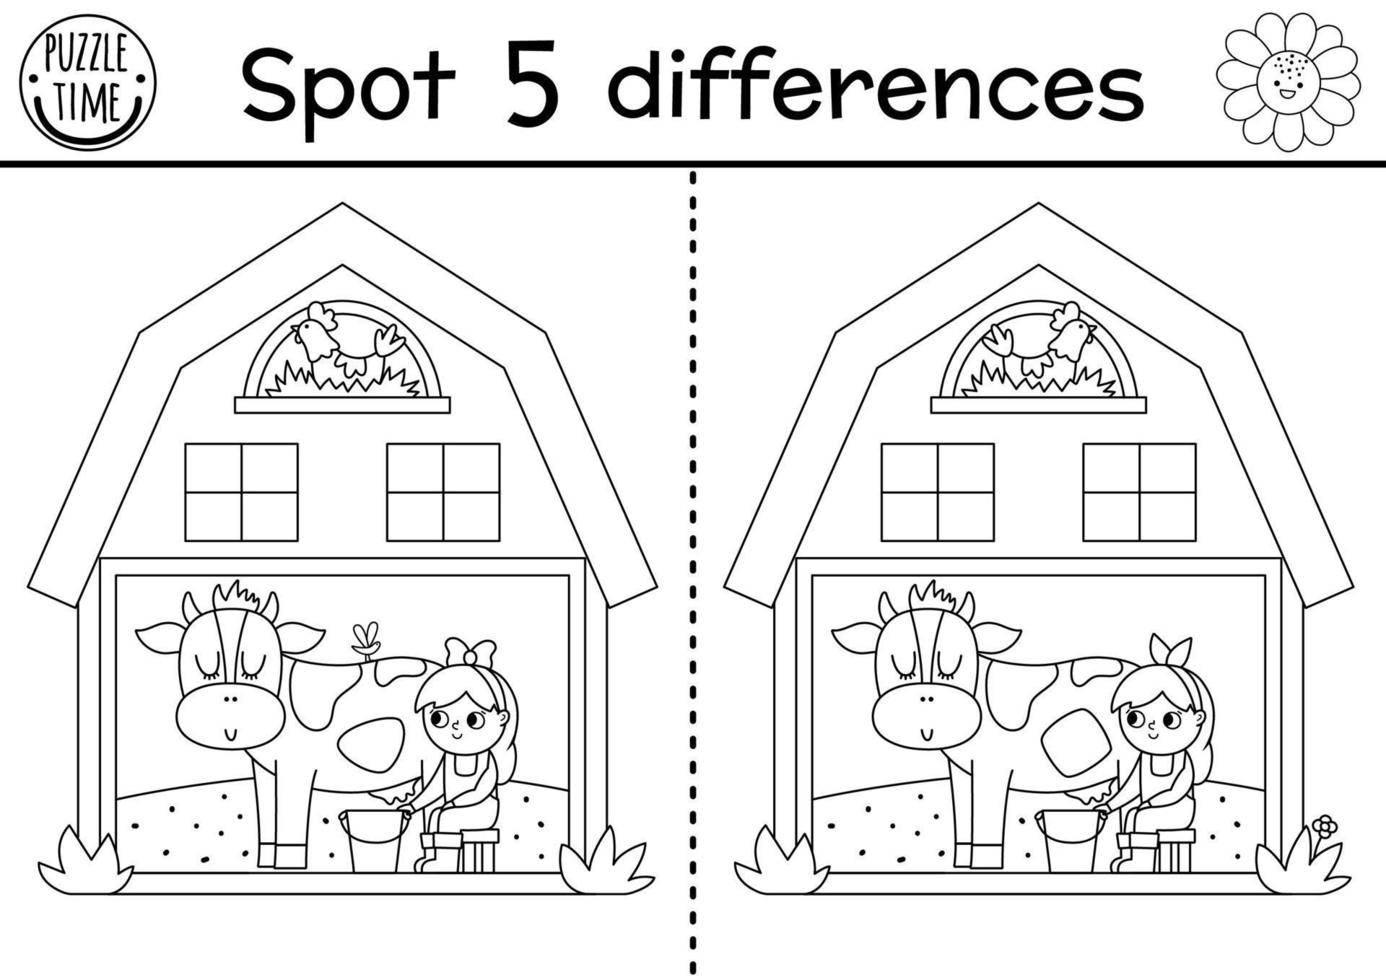 On the farm black and white find differences game for children. Educational line activity with cute barn house with girl milking cow. Rural country puzzle with funny shed. Attention coloring page vector